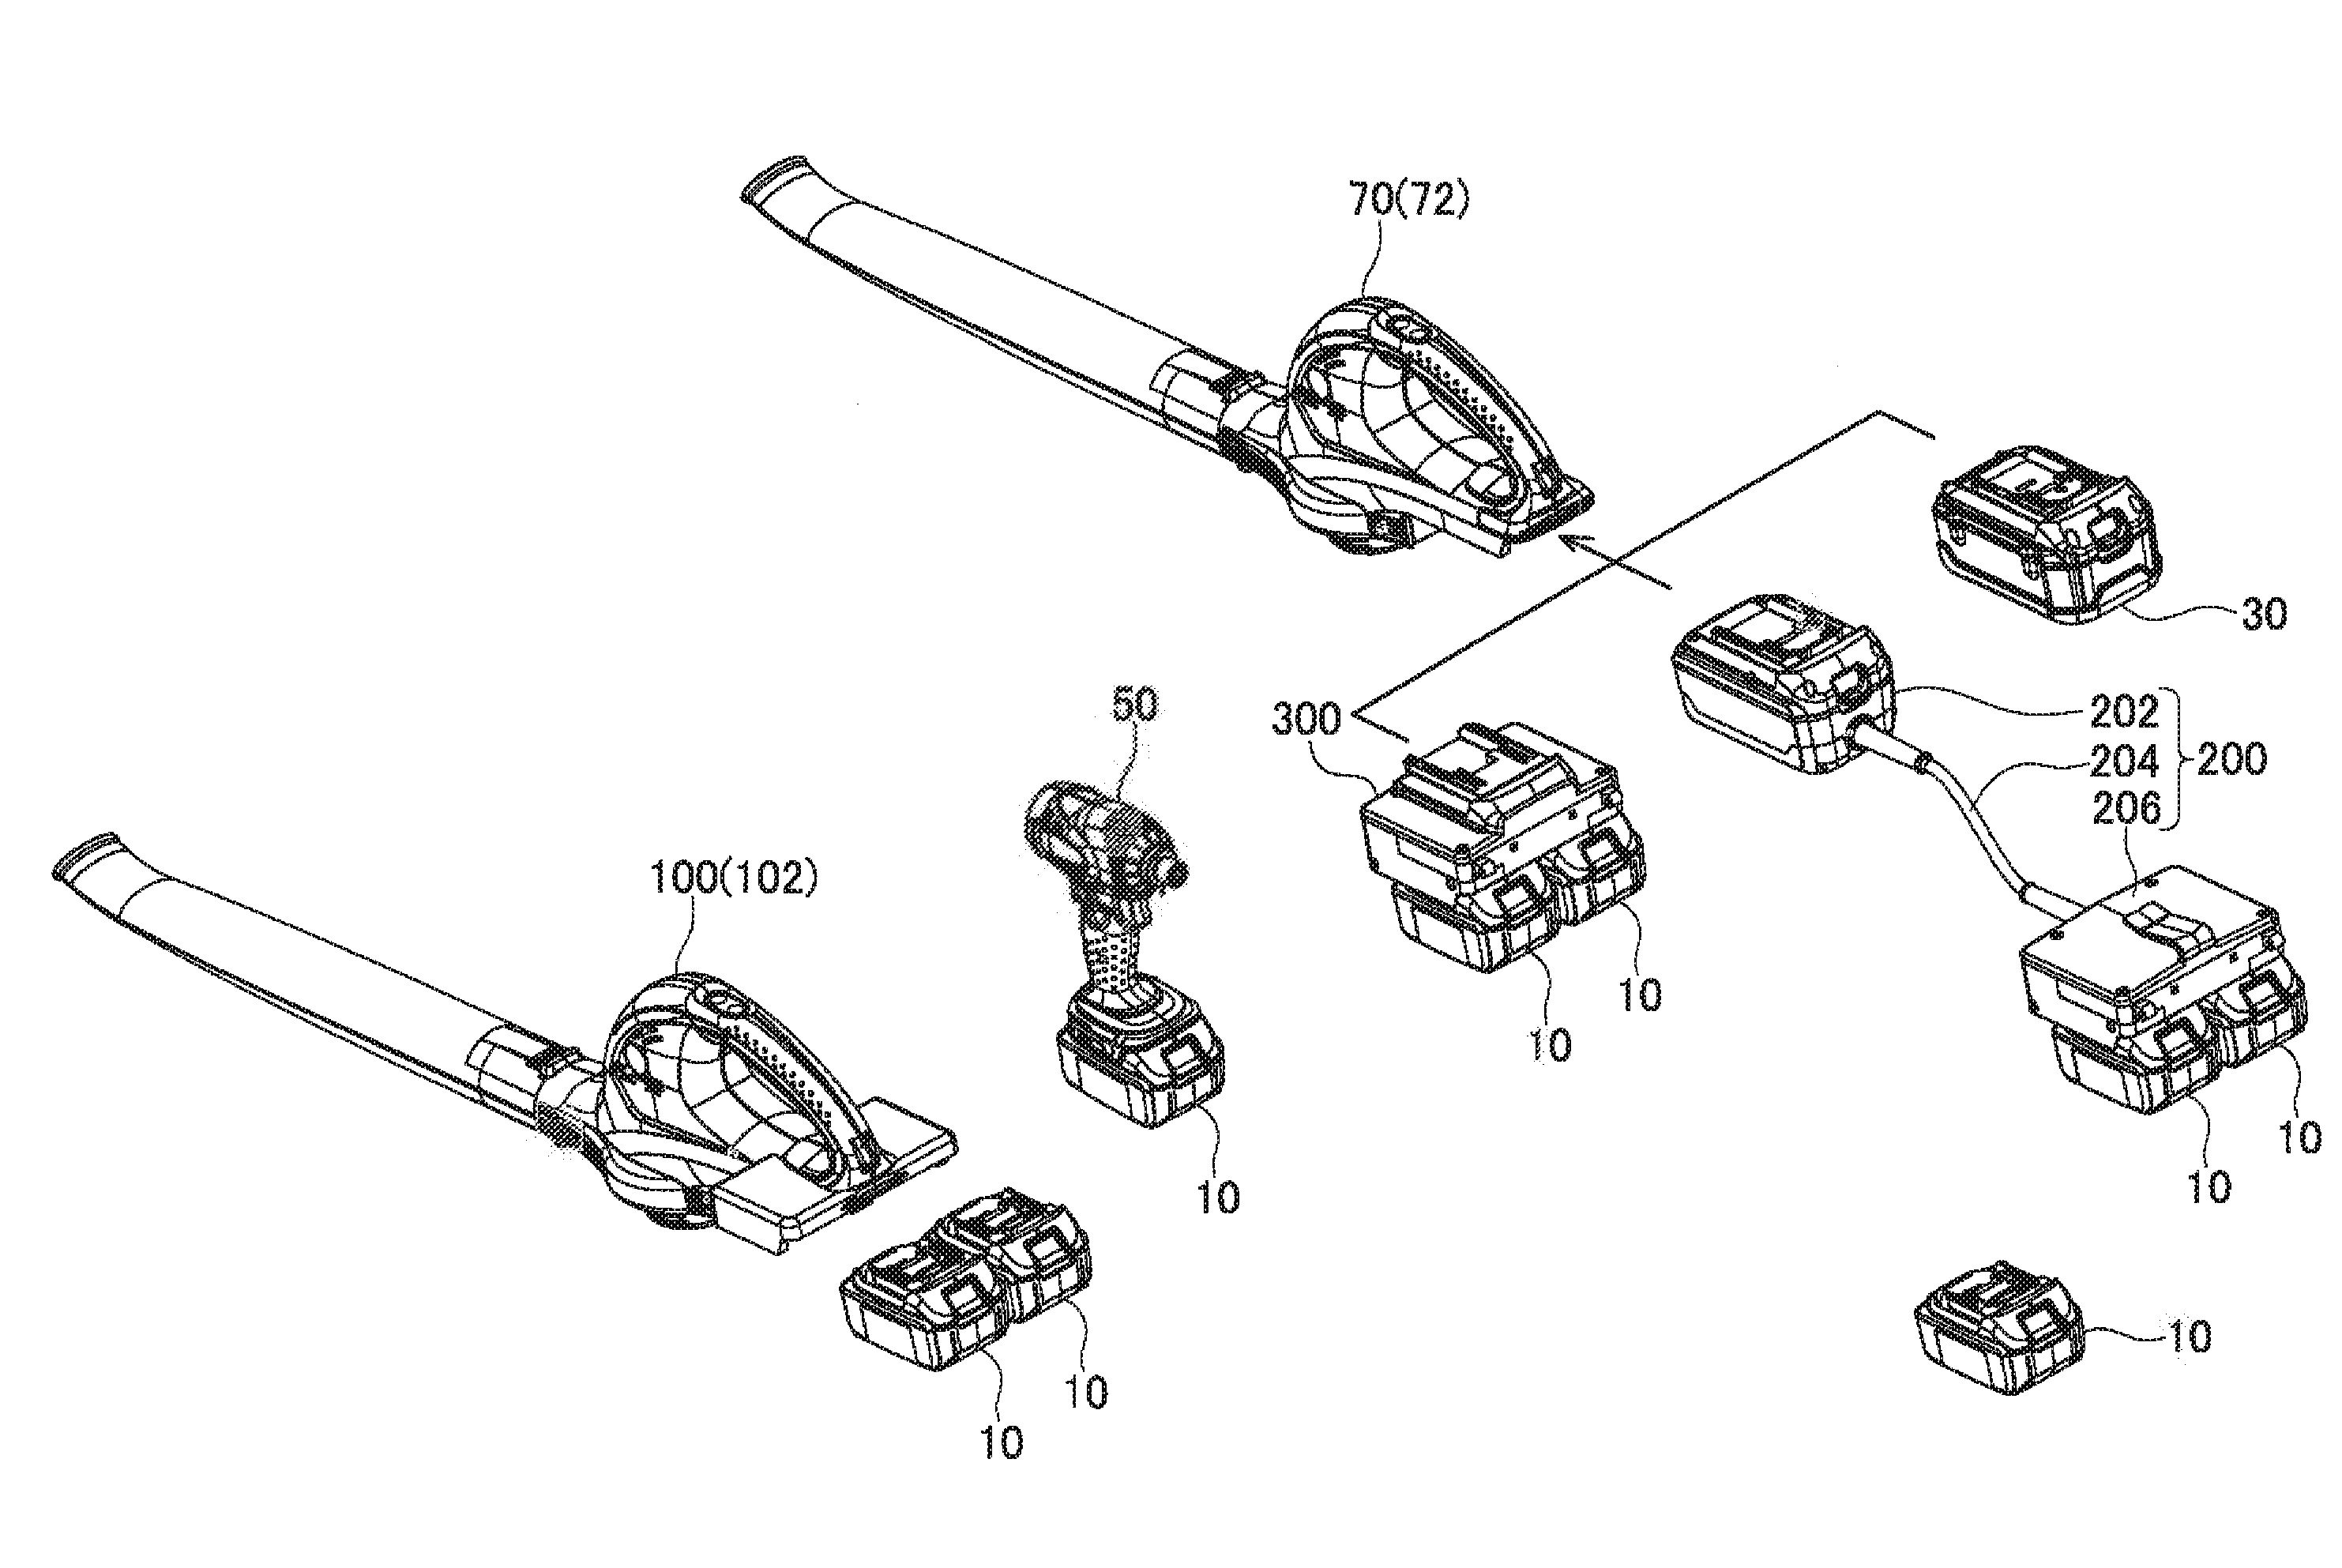 Electric tool powered by a plurality of battery packs and adapter therefor